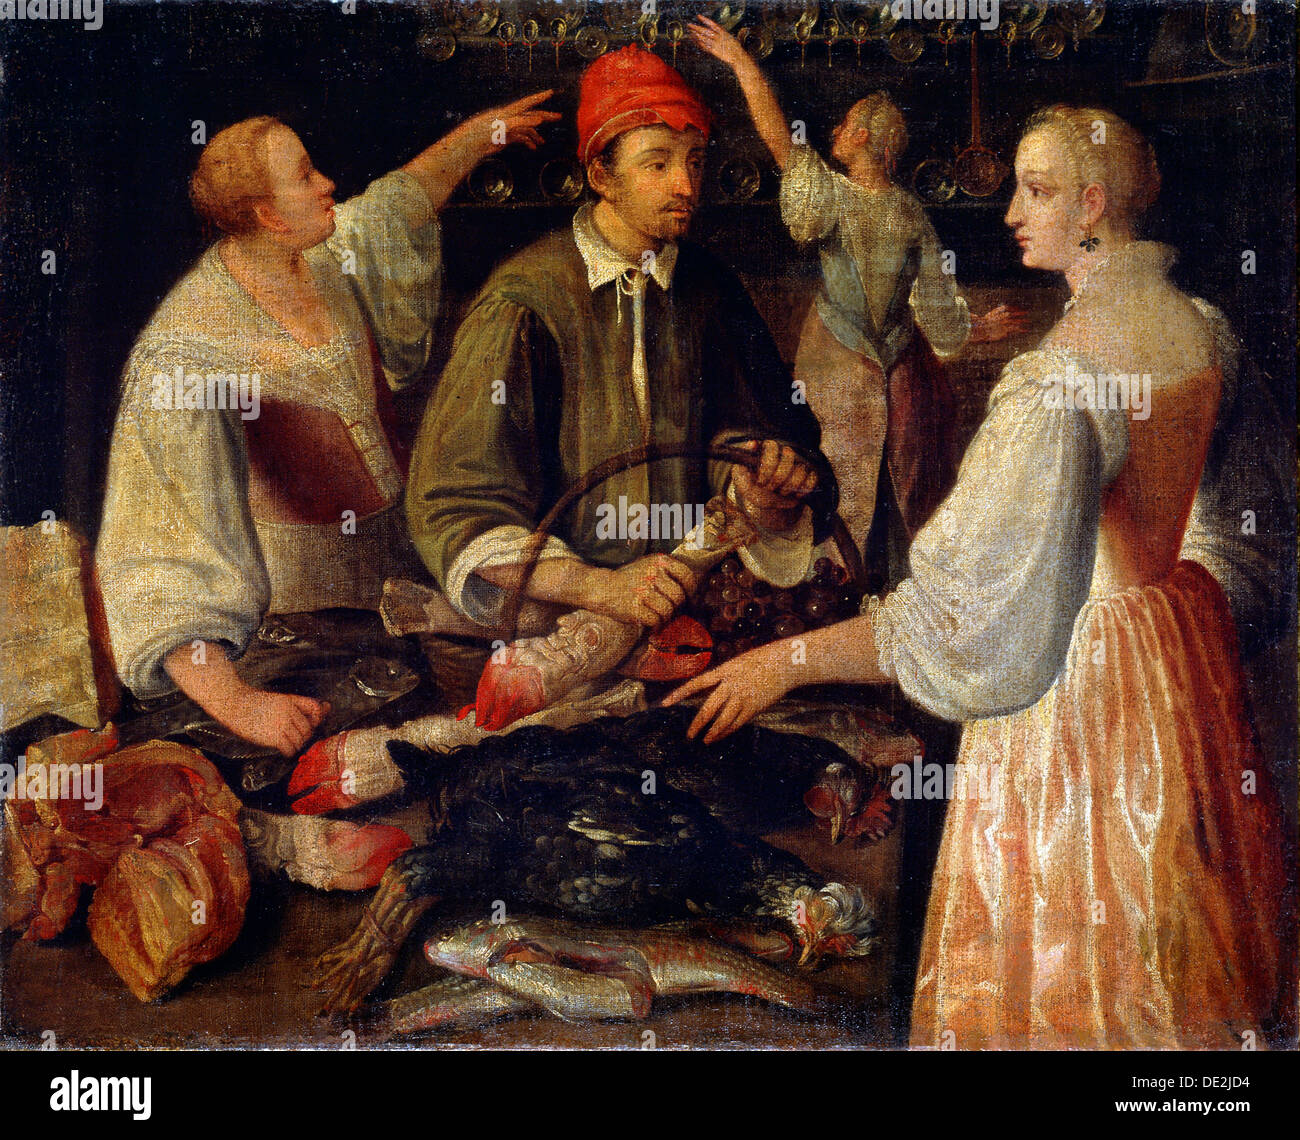 'In a shop', late 16th or early 17th century. Artist: Lodewijk Toeput Stock Photo